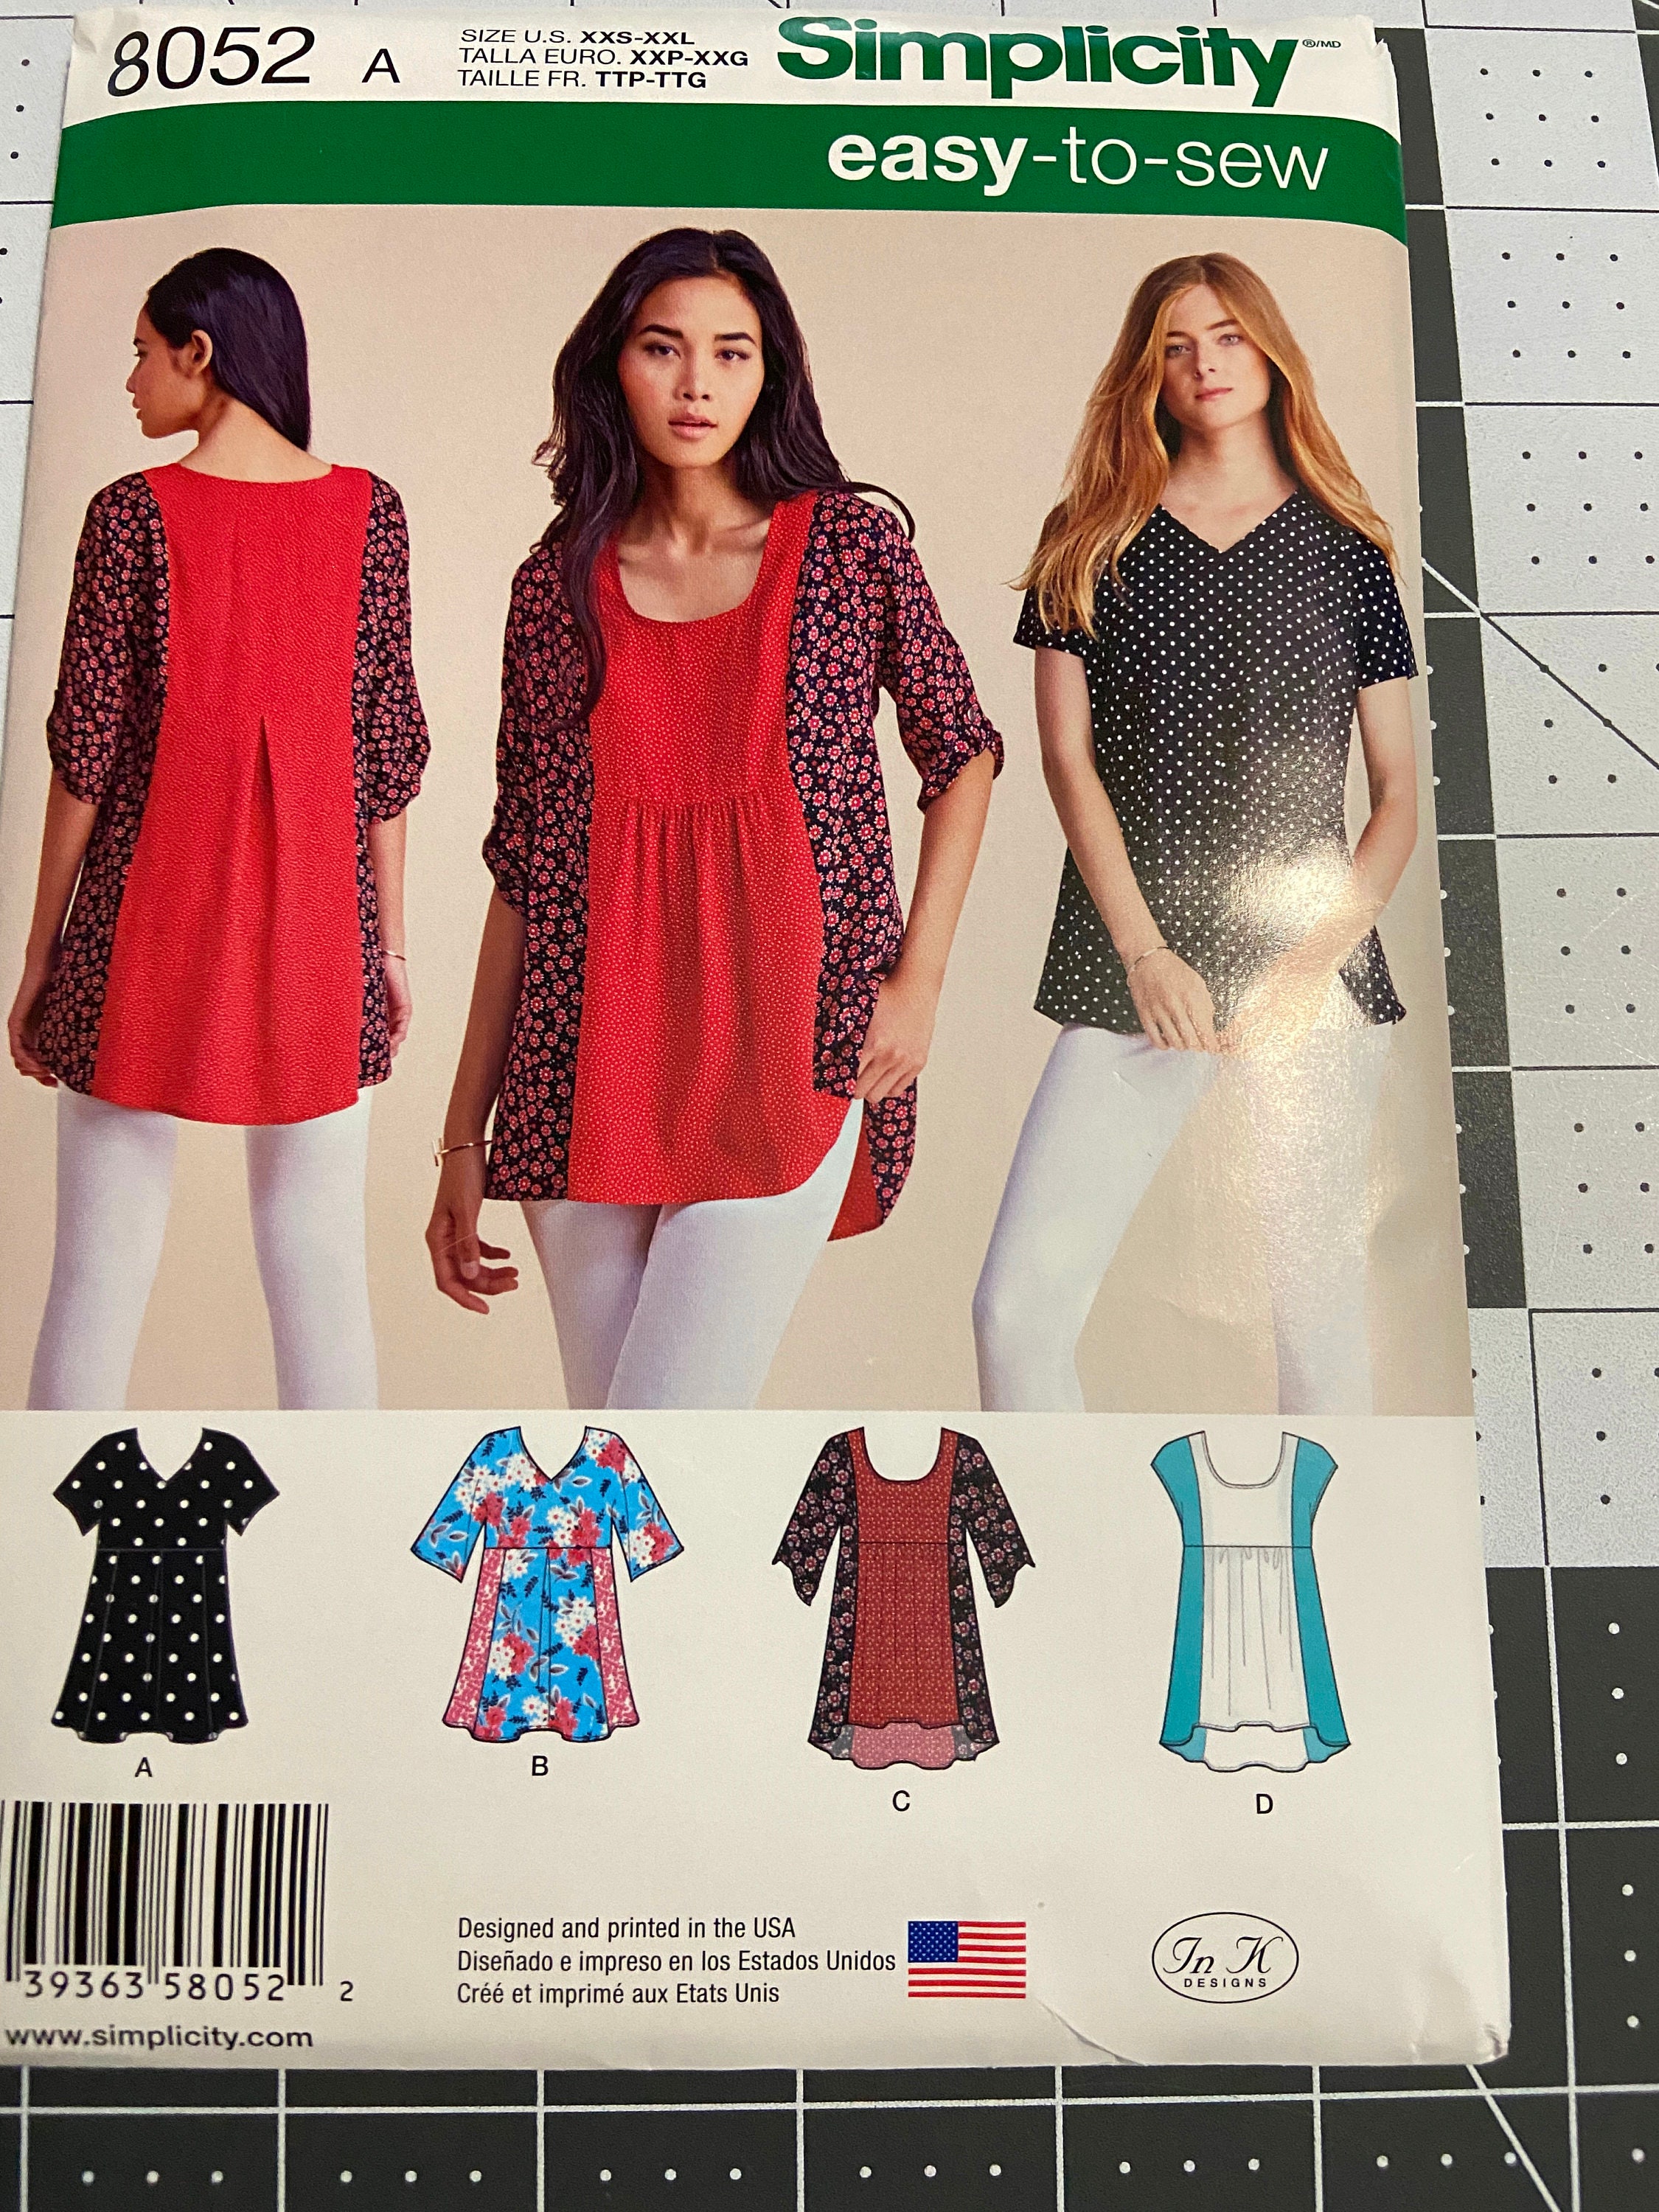  Simplicity 8052 Easy to Sew Women's Blouse Top Sewing